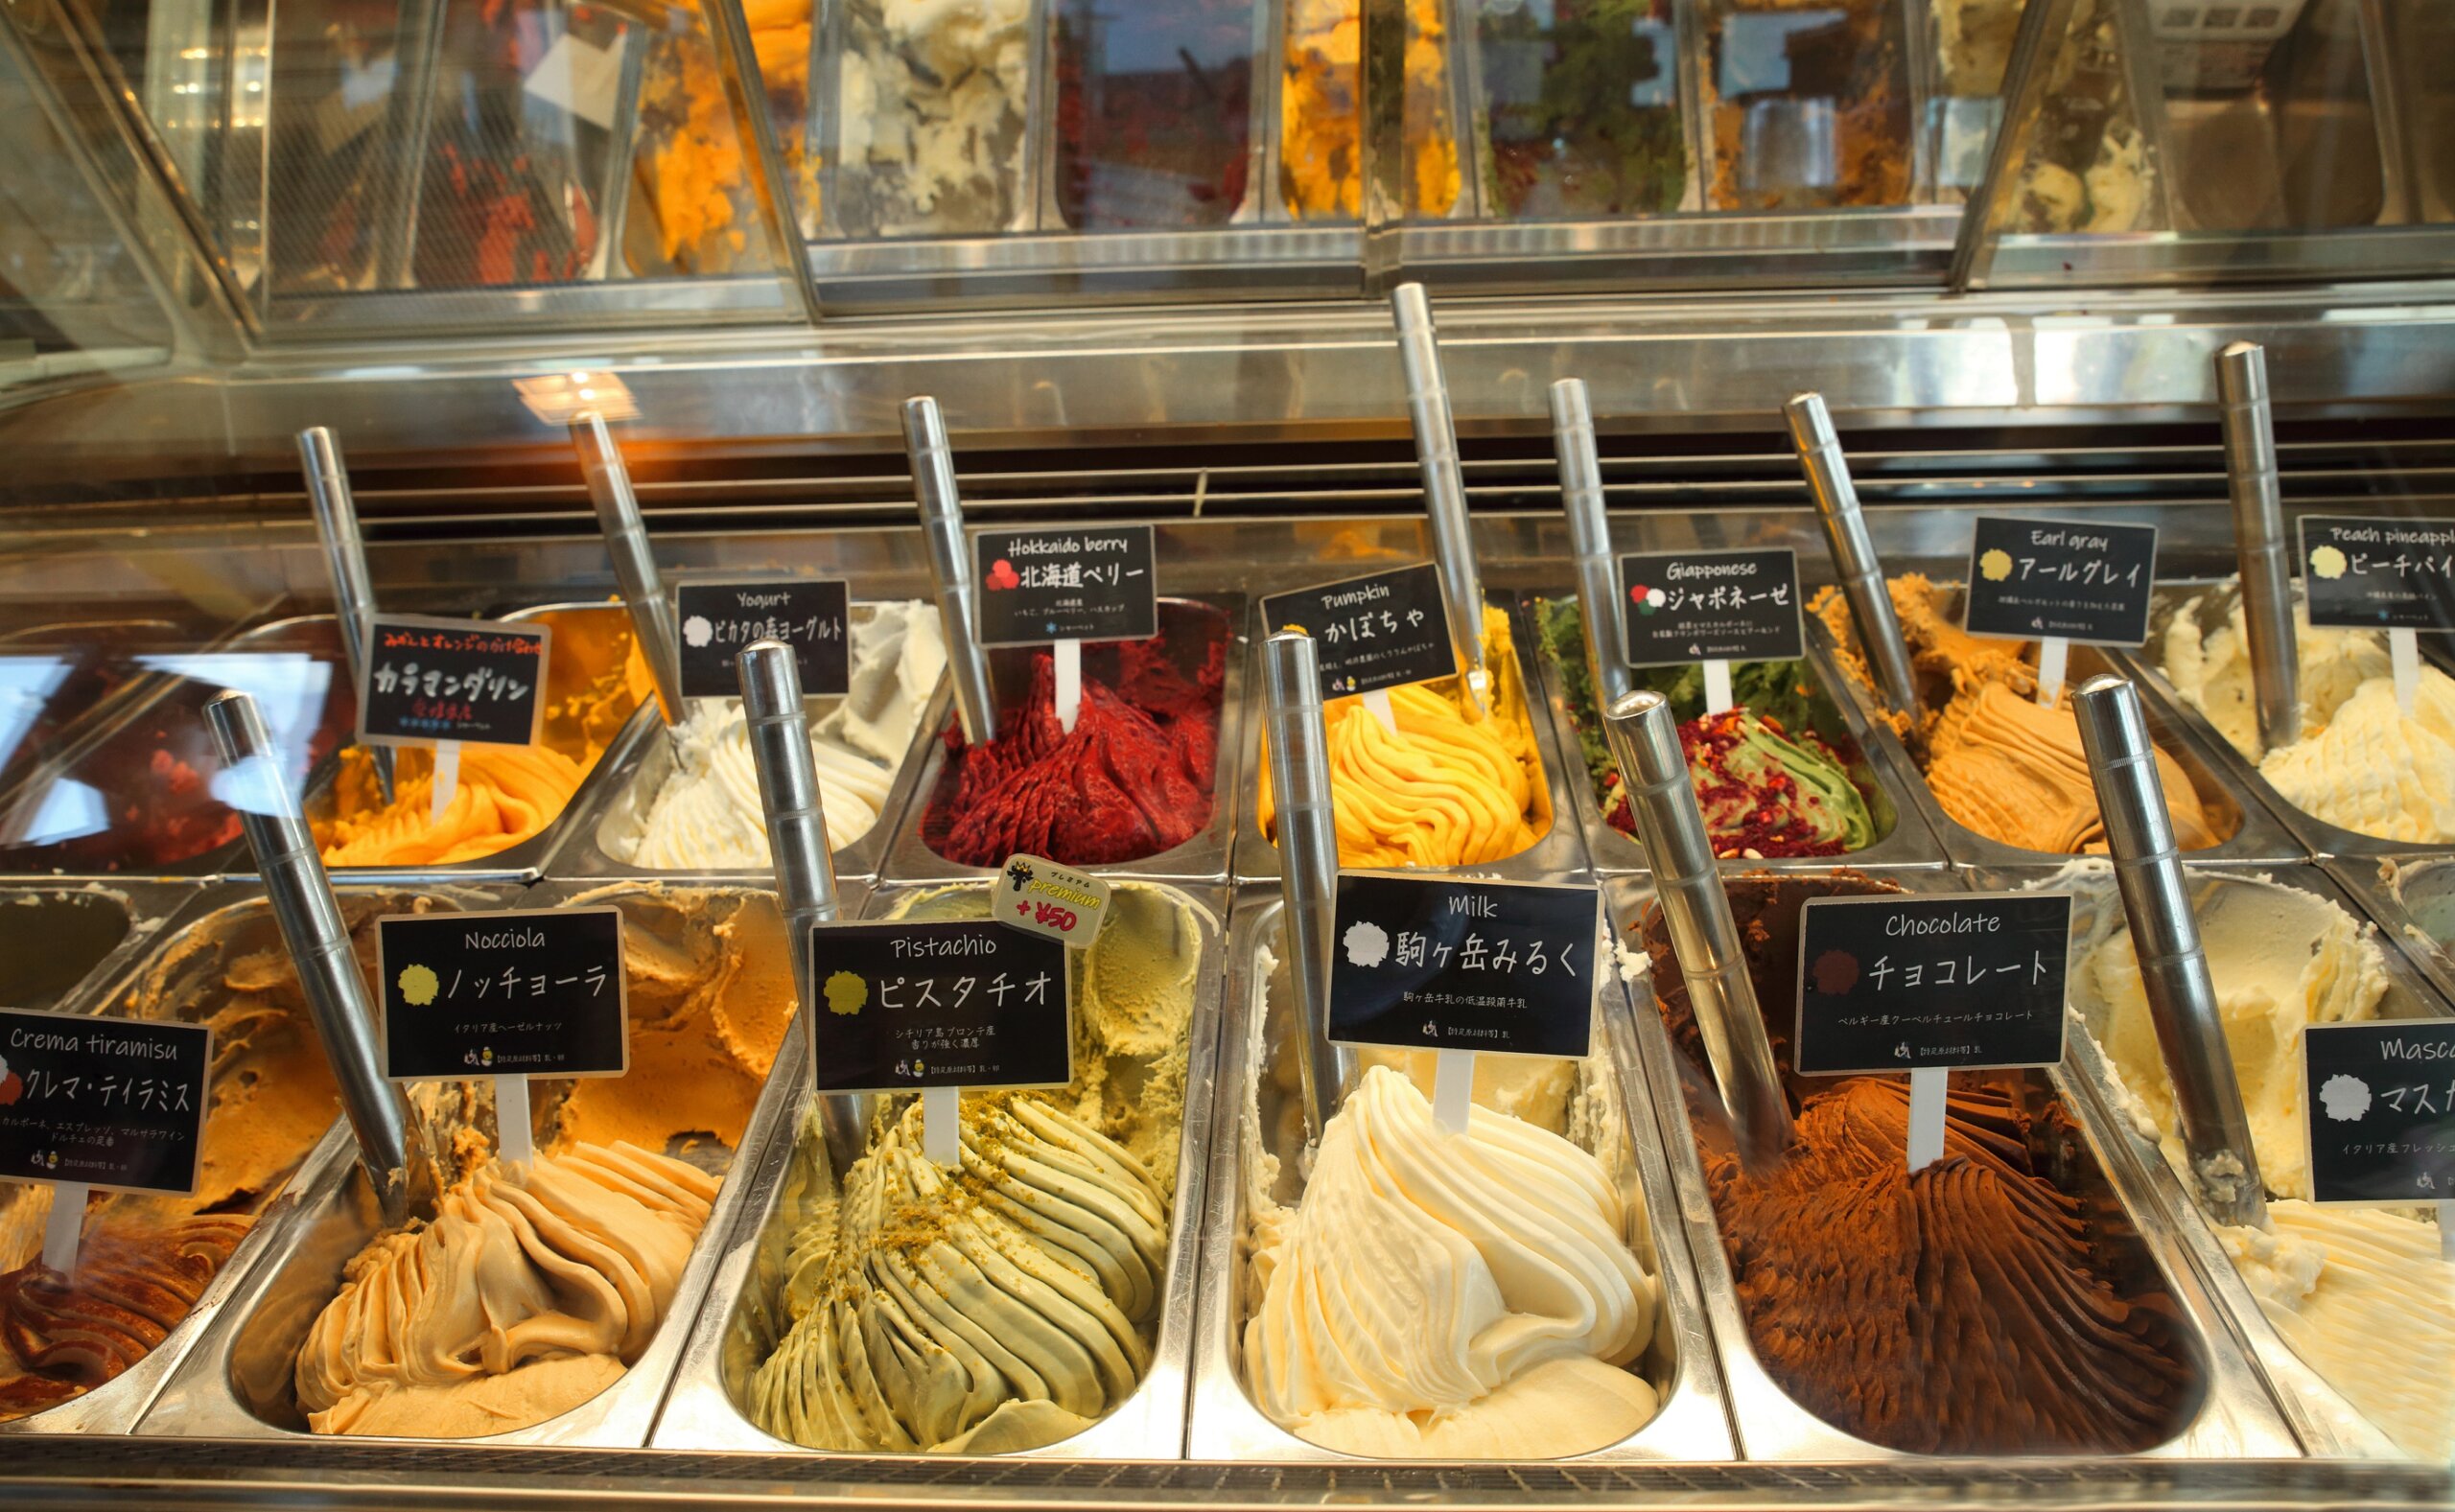 Choose from Hundreds of Offerings and Find a New Favorite Ice Cream Flavor at Pikata no Mori